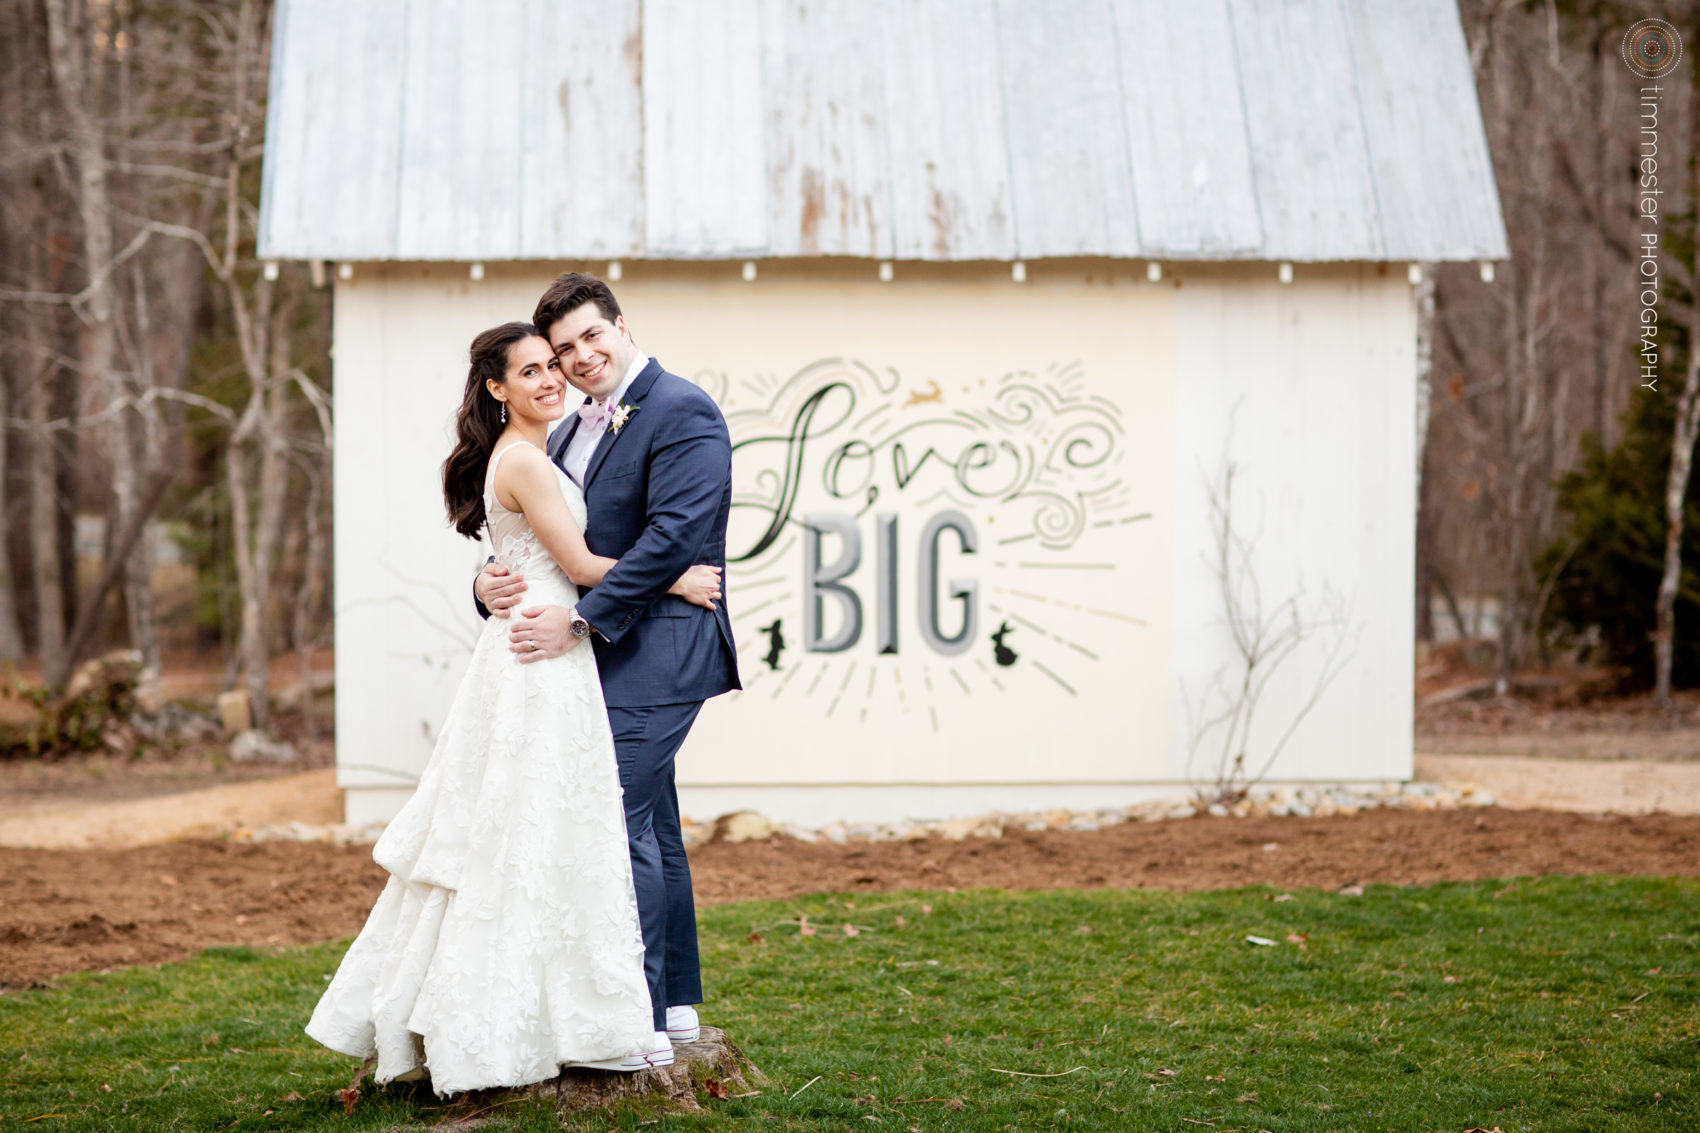 A spring, outdoor wedding and reception in Chapel Hill, NC at The Parlour at Mann's Chapel